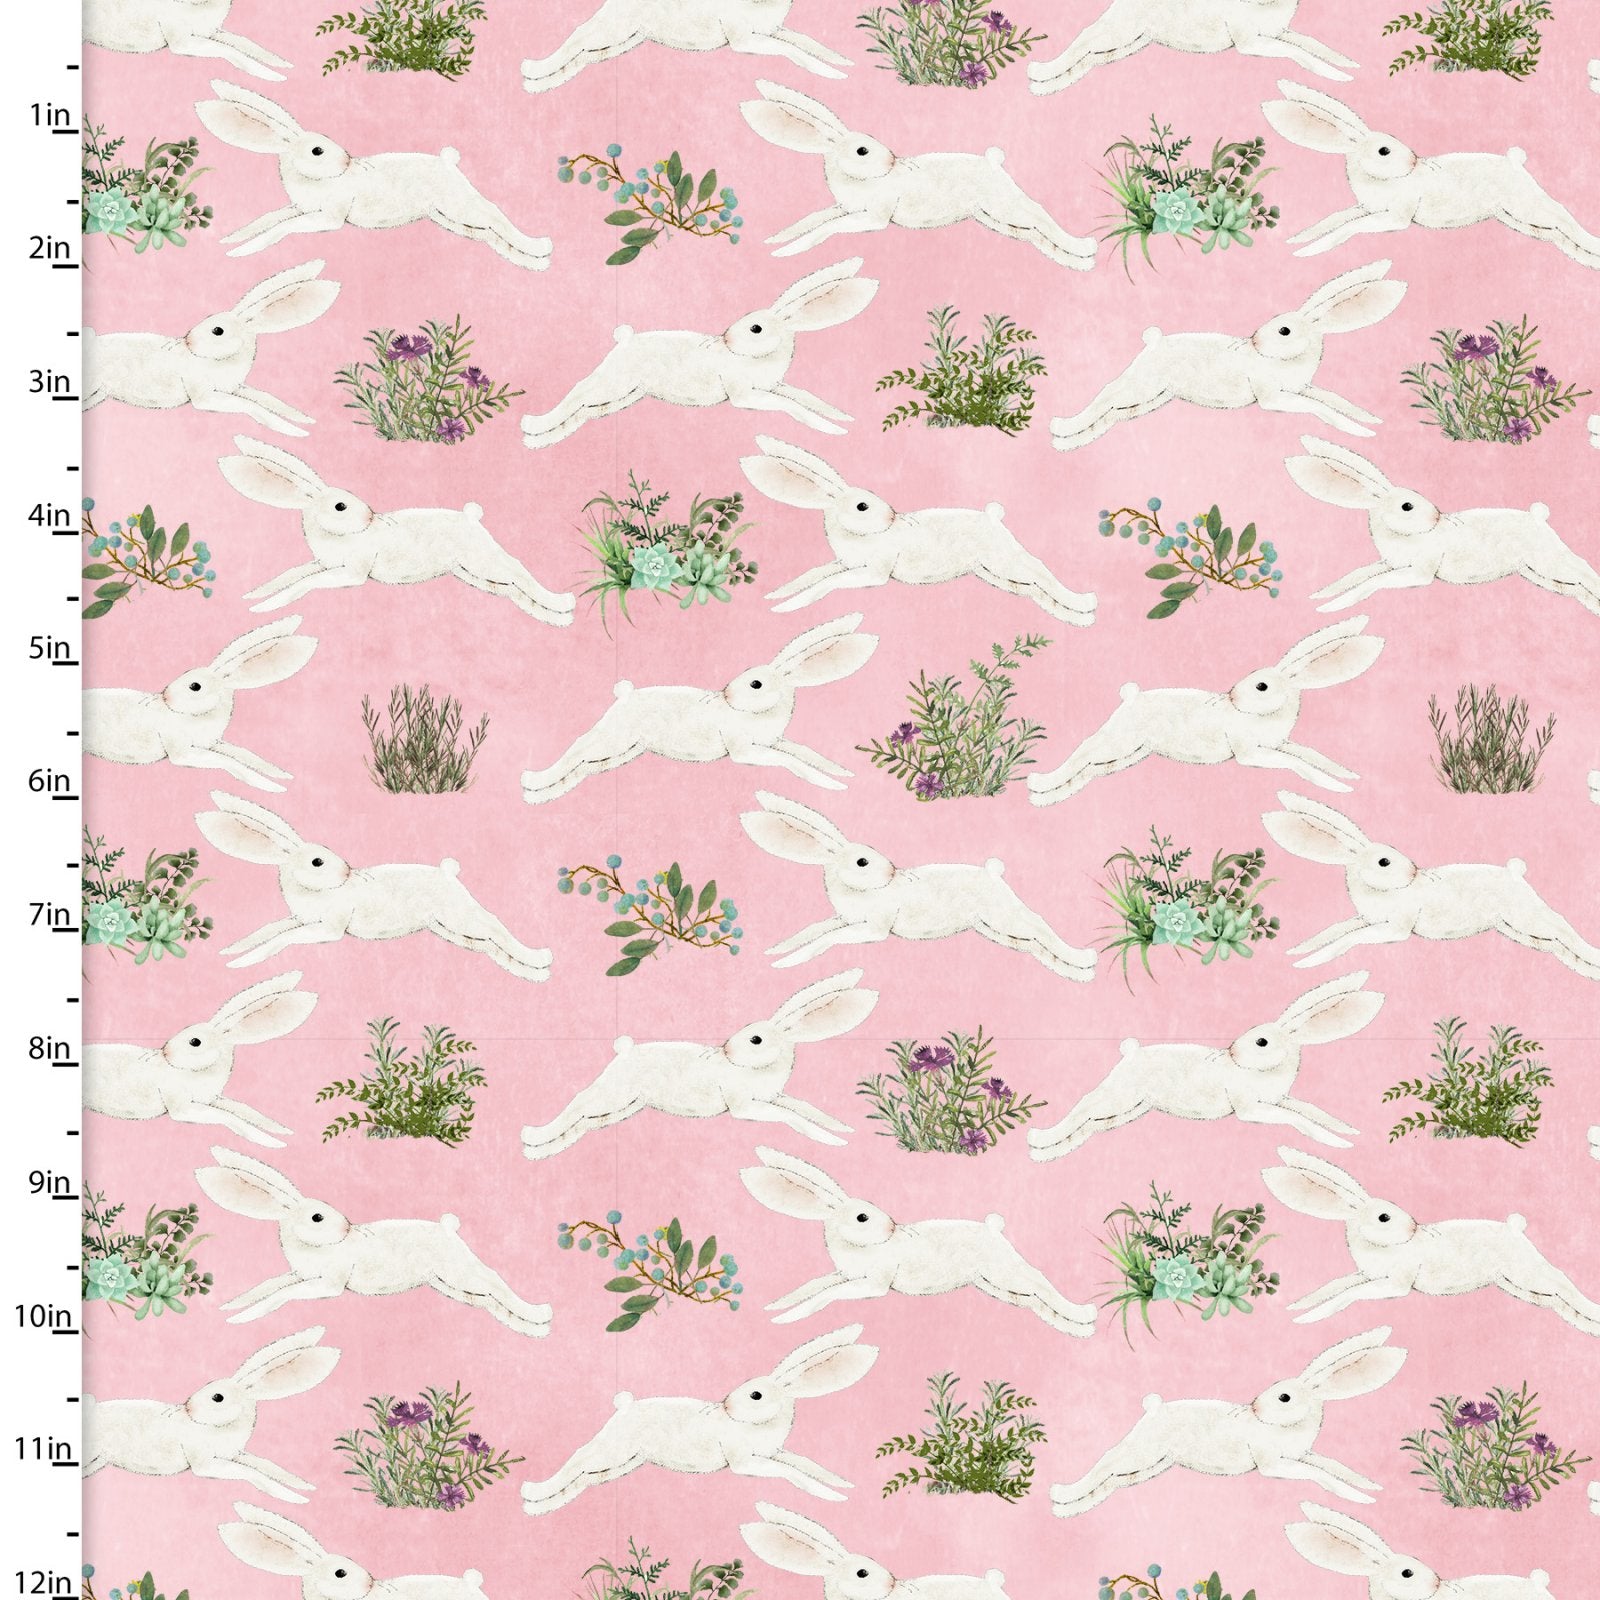 Spring Bunnies on Pink - Weave & Woven